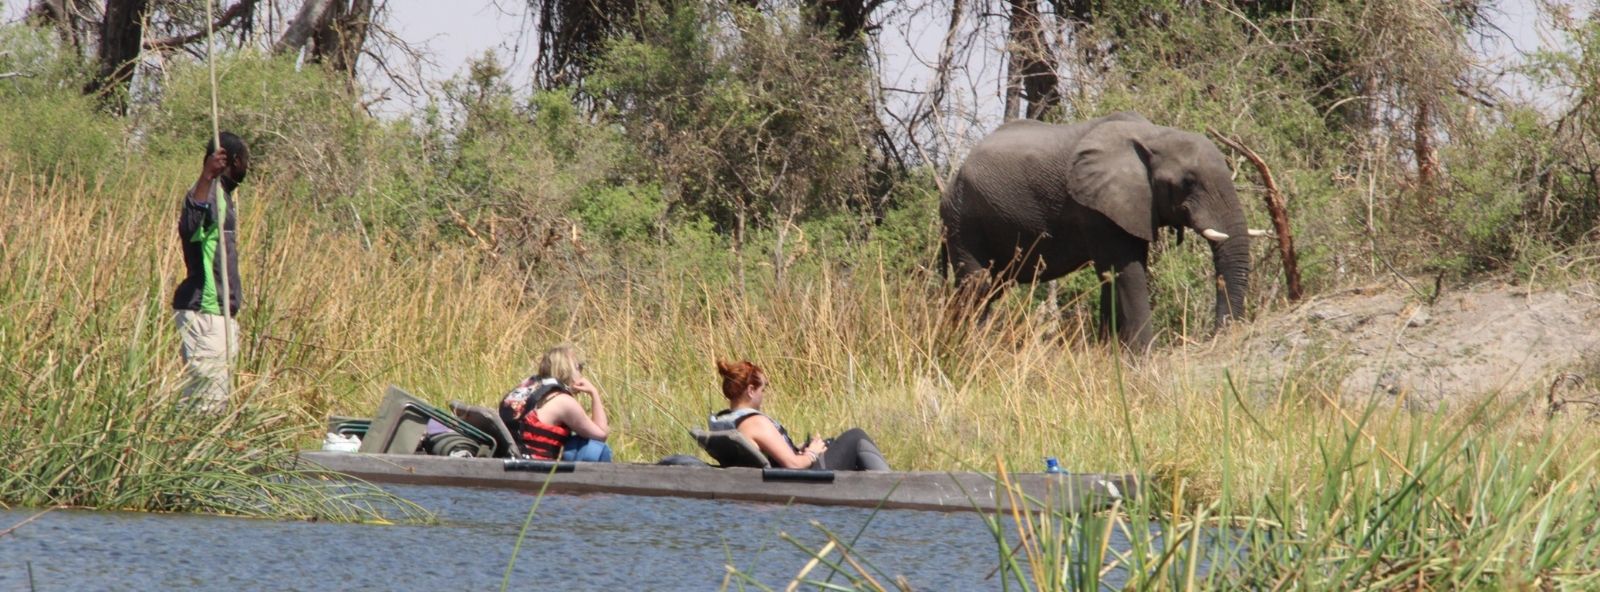 Game viewing from a Mokoro in the Okavango - picture of two people in the Mokoro enjoying a sighting of an elephant on the bank